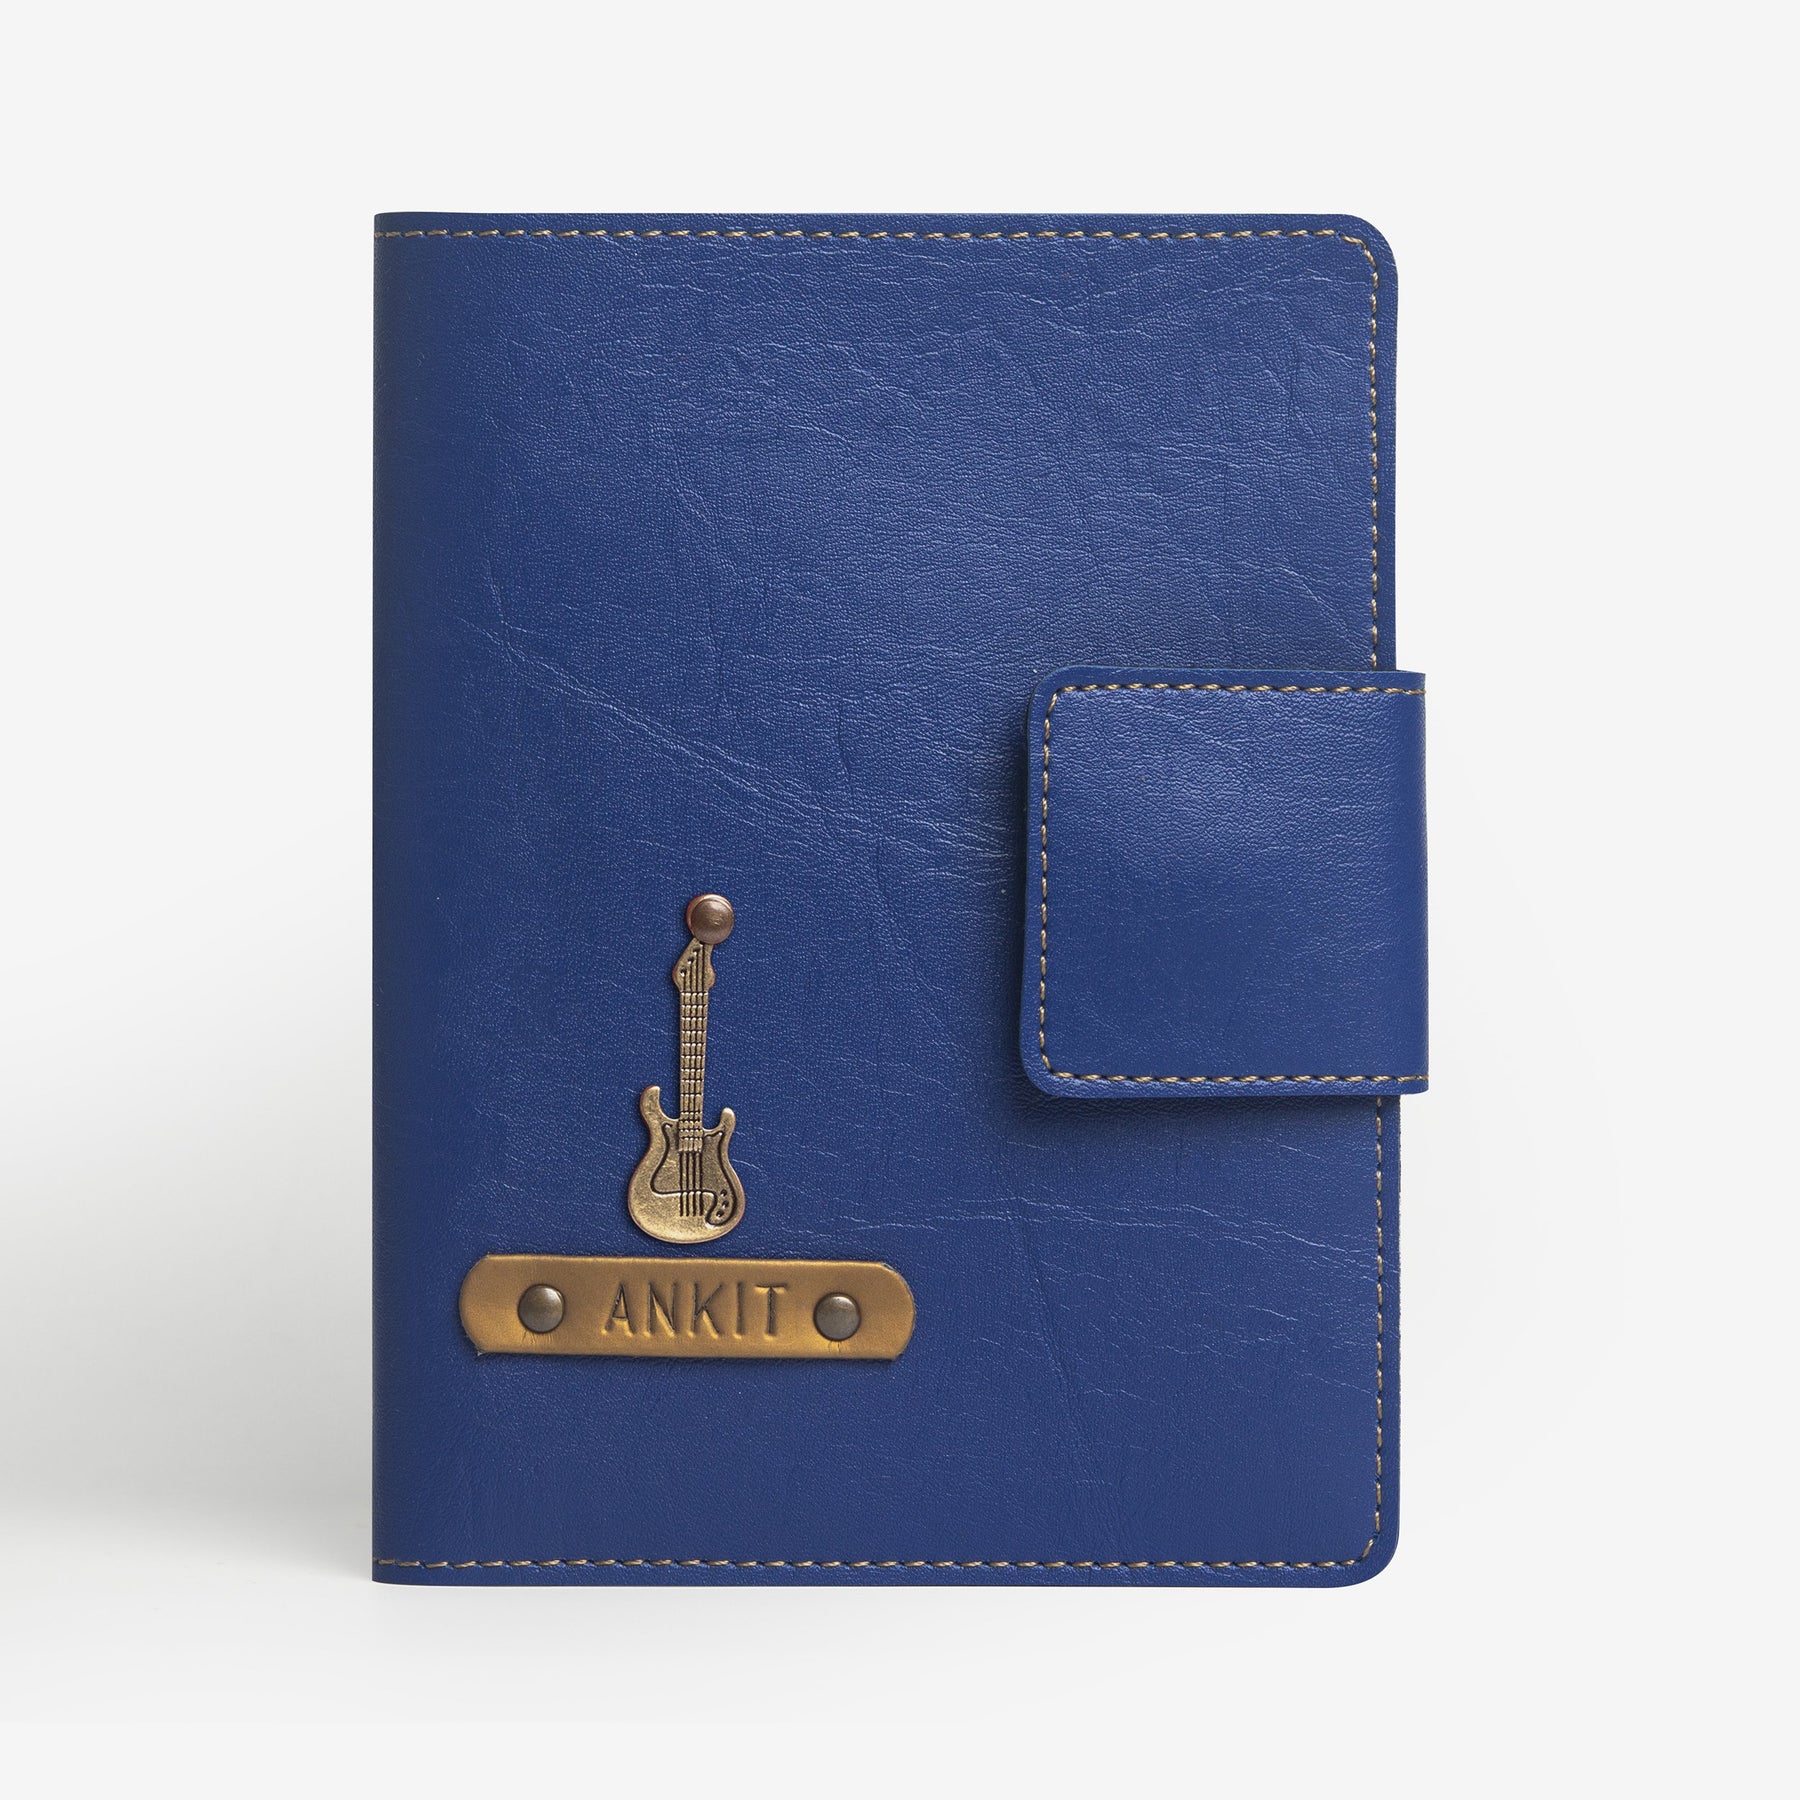 Passport cover with button - Blue